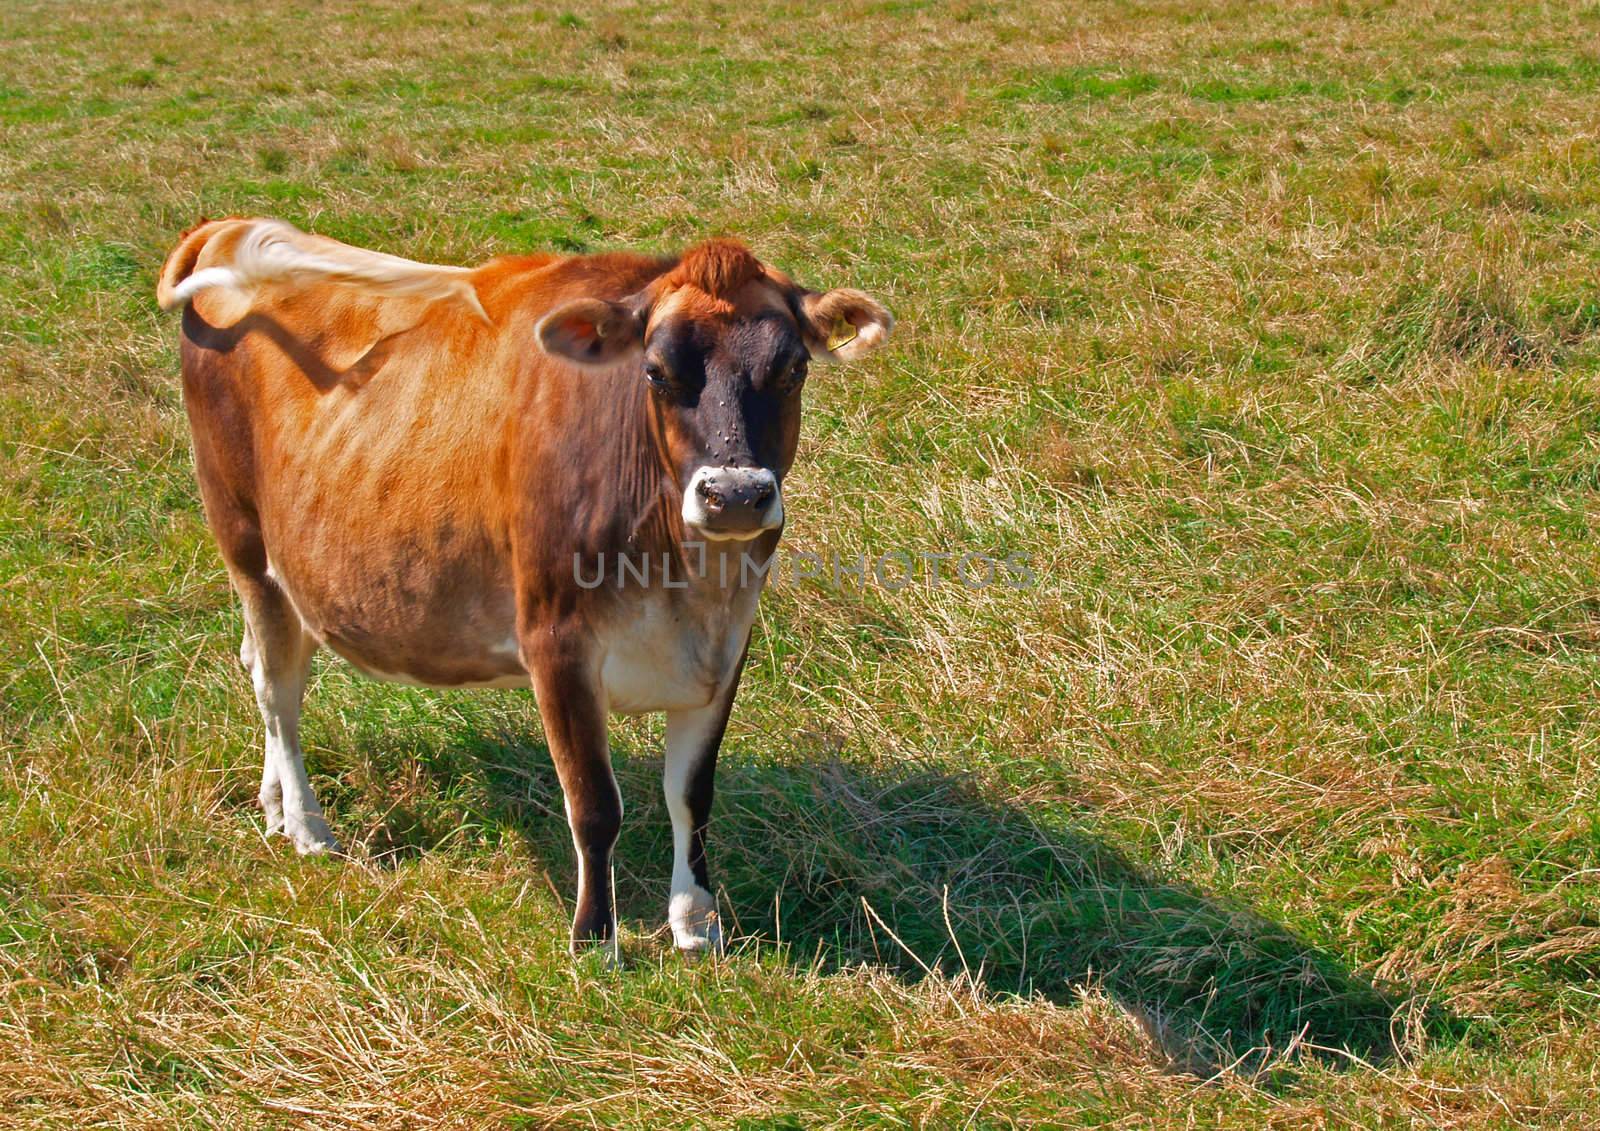 The famous Jersey Cow on the channel island Jersey, UK